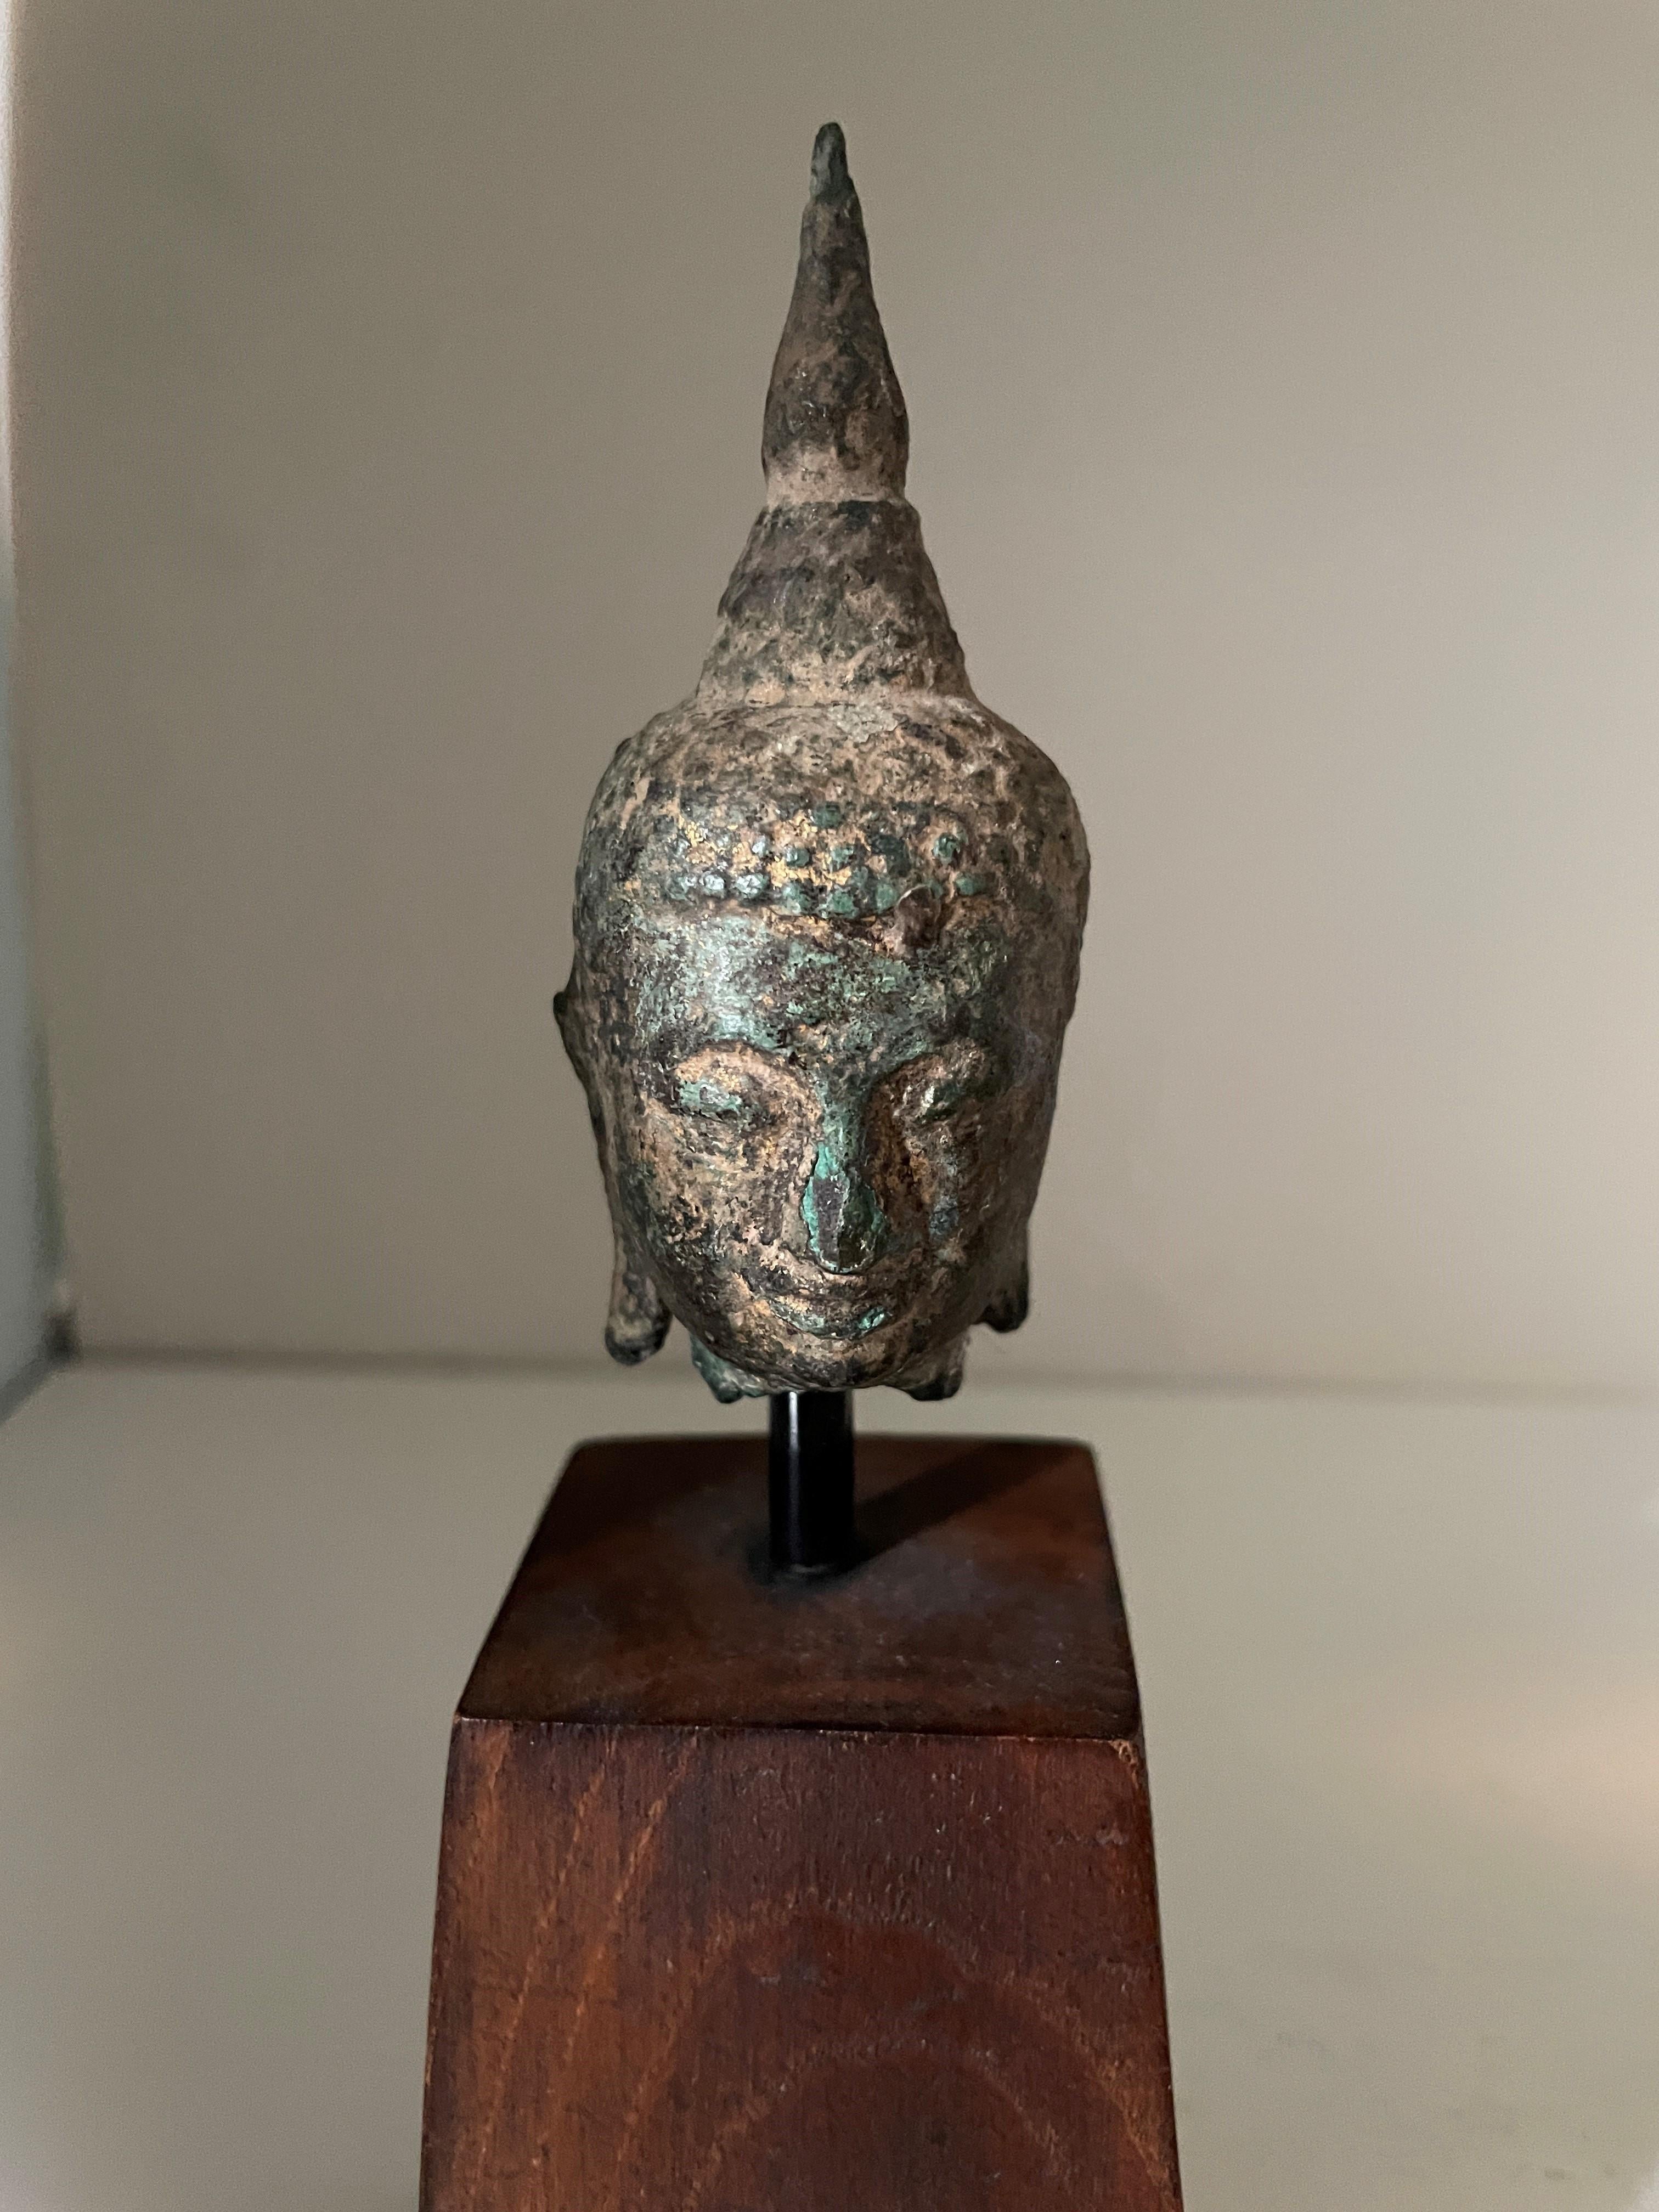 Small antique bronze bust of Buddha head on solid wood base. The head is heavily distressed and patinated showing significant age; rear of the head has some minor losses but nothing significant or detrimental to the use of the piece. Wood base looks